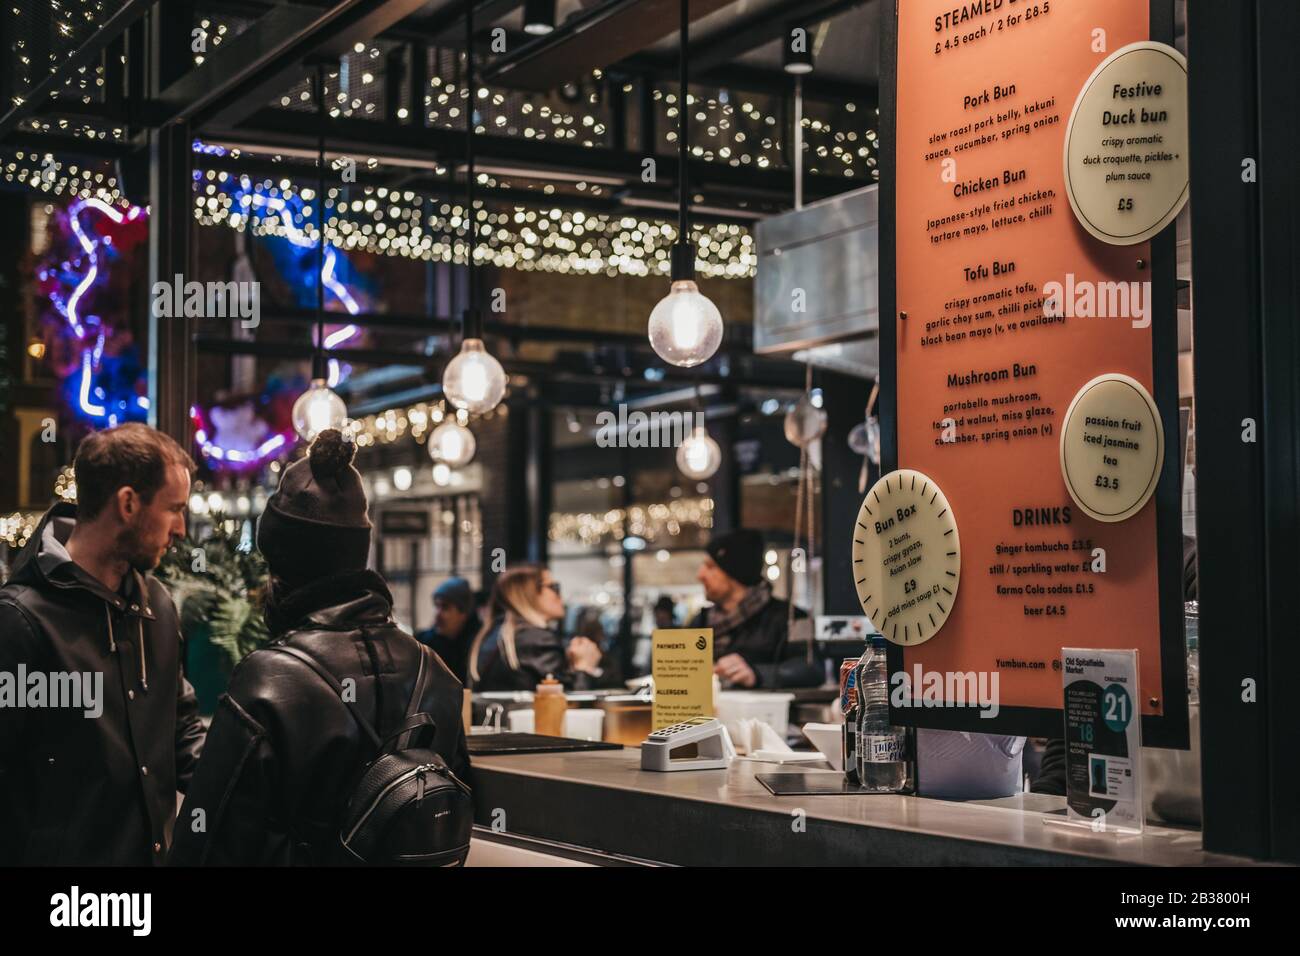 London, UK - December 14, 2019: Menu at a Chinese food stall in Spitalfields Market, one of the finest Victorian Markets in London with stalls offerin Stock Photo